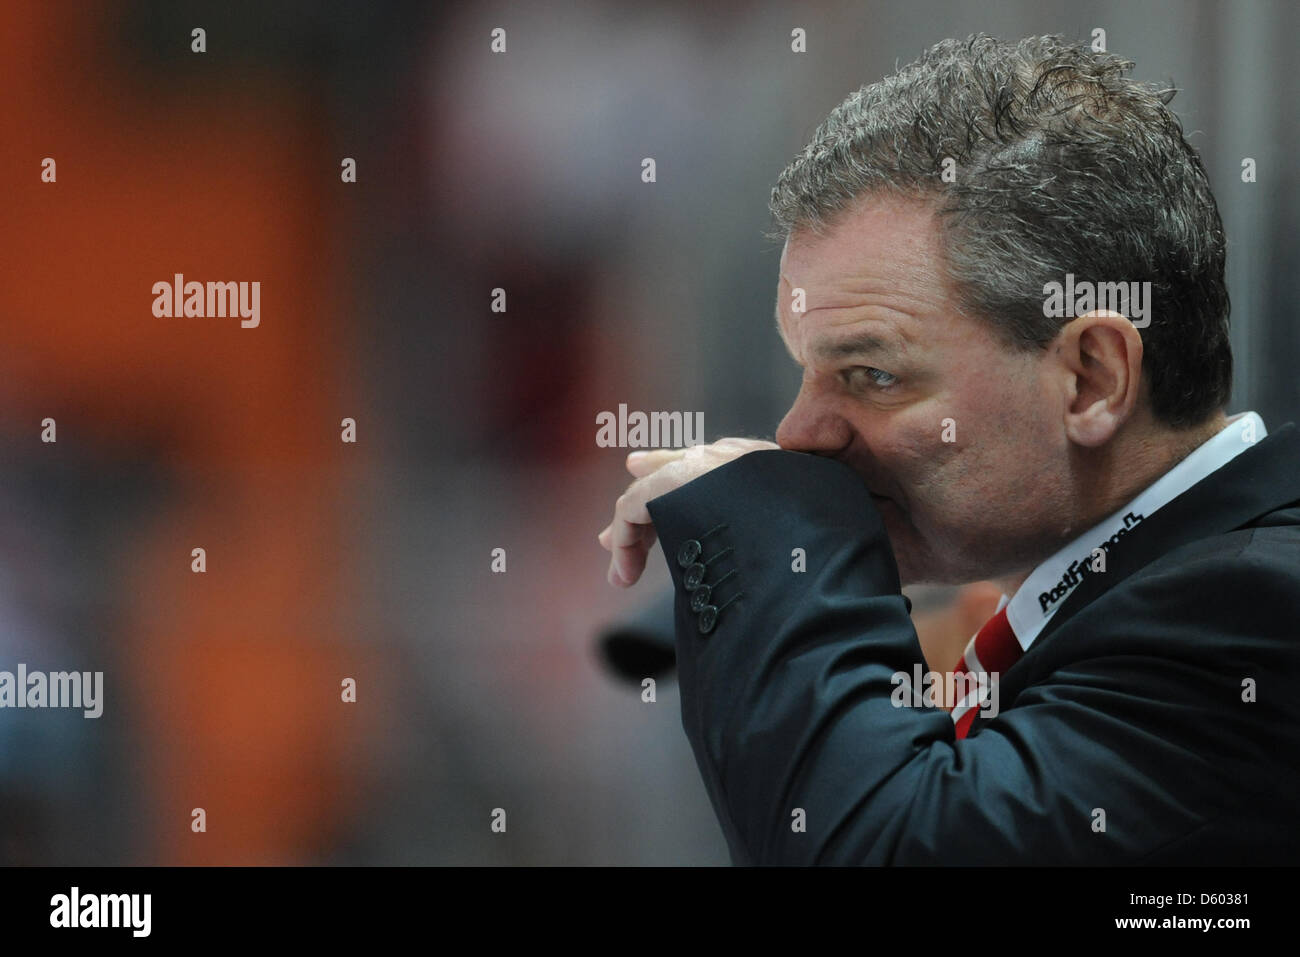 Switzerland's national coachSean Simpson gestures during the ice hockey Deustchland Cup match between Canada and Switzerland at the Olympic Ice Stadium in Munich, Germany, 11 November 2012. Photo: ANDREAS GEBERT Stock Photo